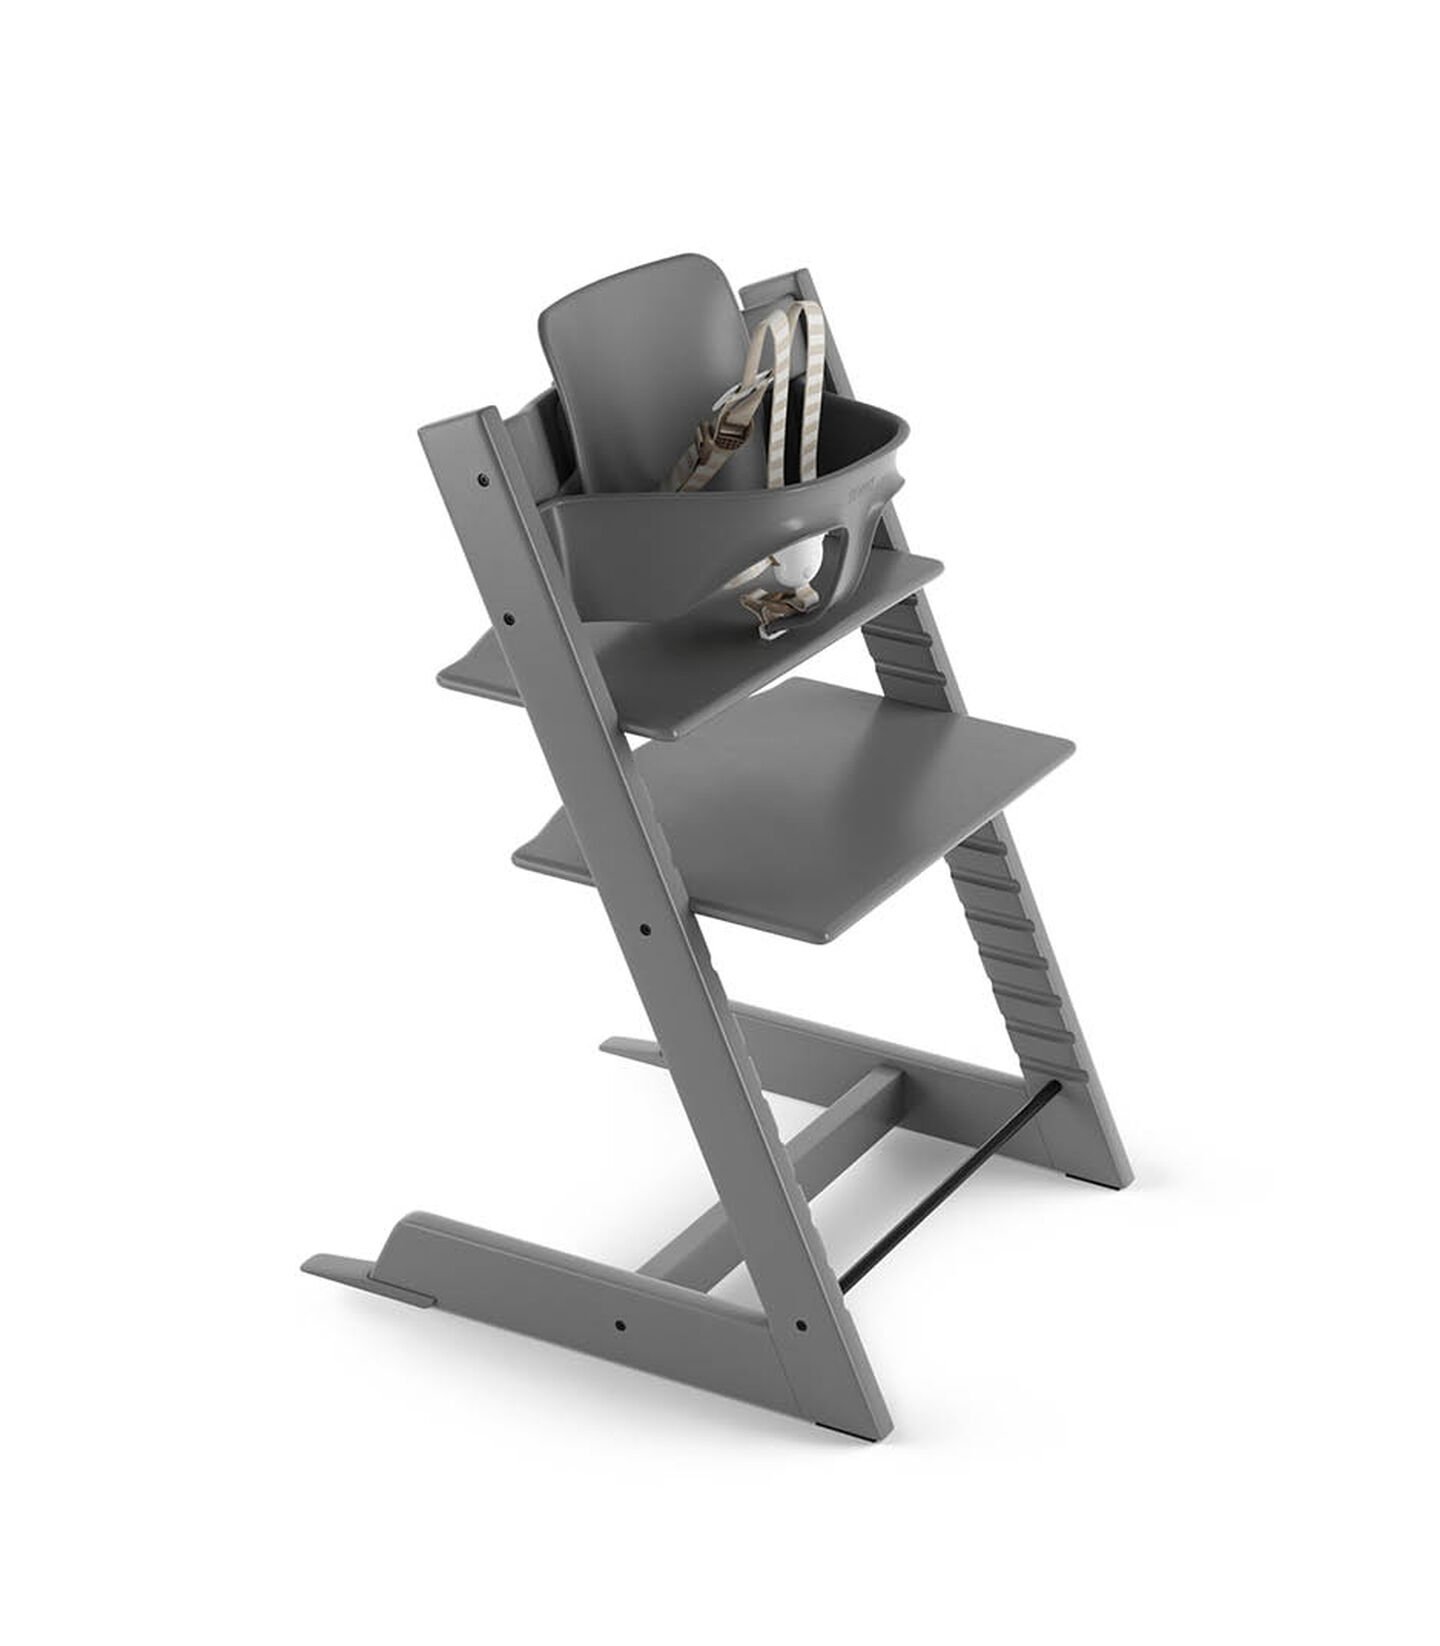 Tripp Trapp® Bundle High Chair US 18 Storm Grey, Storm Grey, mainview view 1